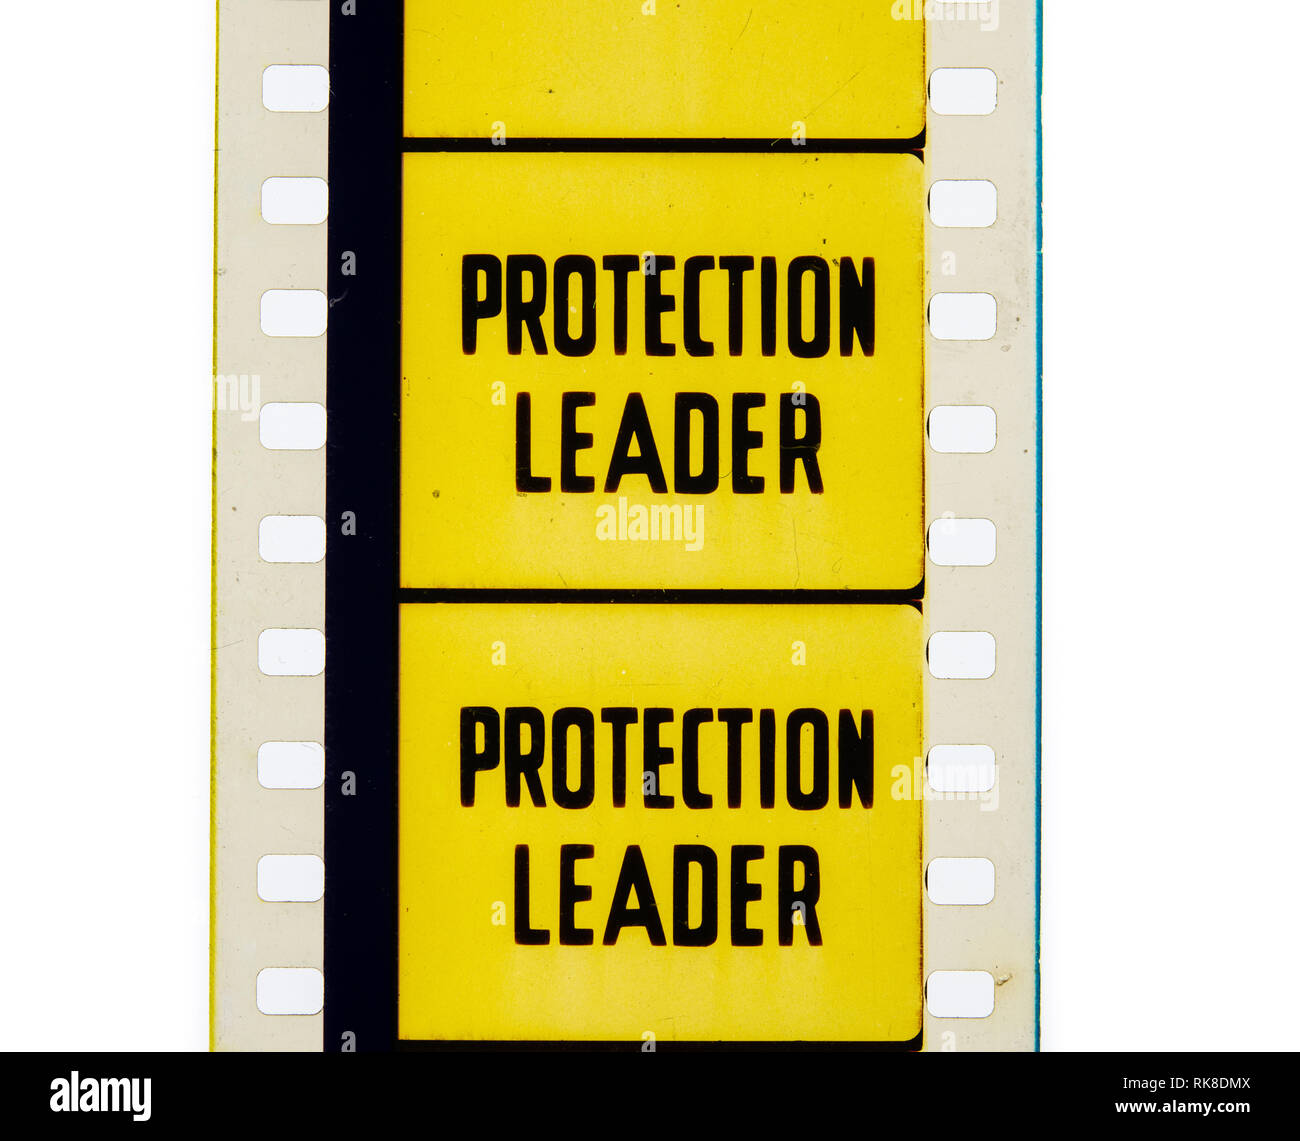 Extreme close up of 35mm movie film strip with protection leader text on yellow Stock Photo